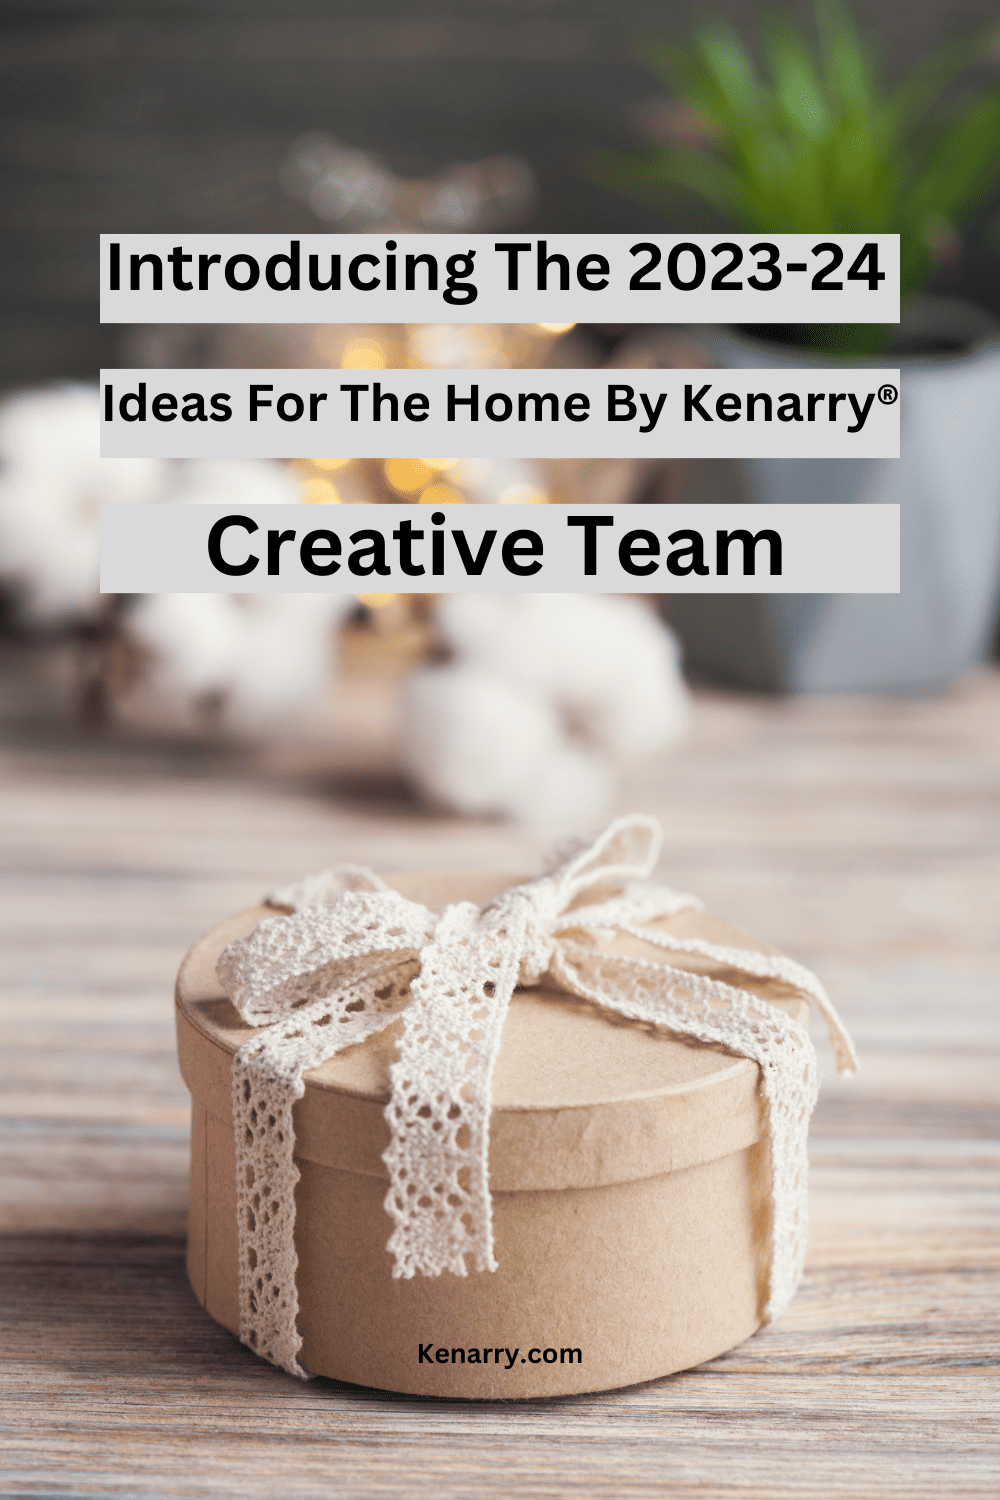 Introducing the 2023-24 Ideas for the Home By Kenarry Creative Team